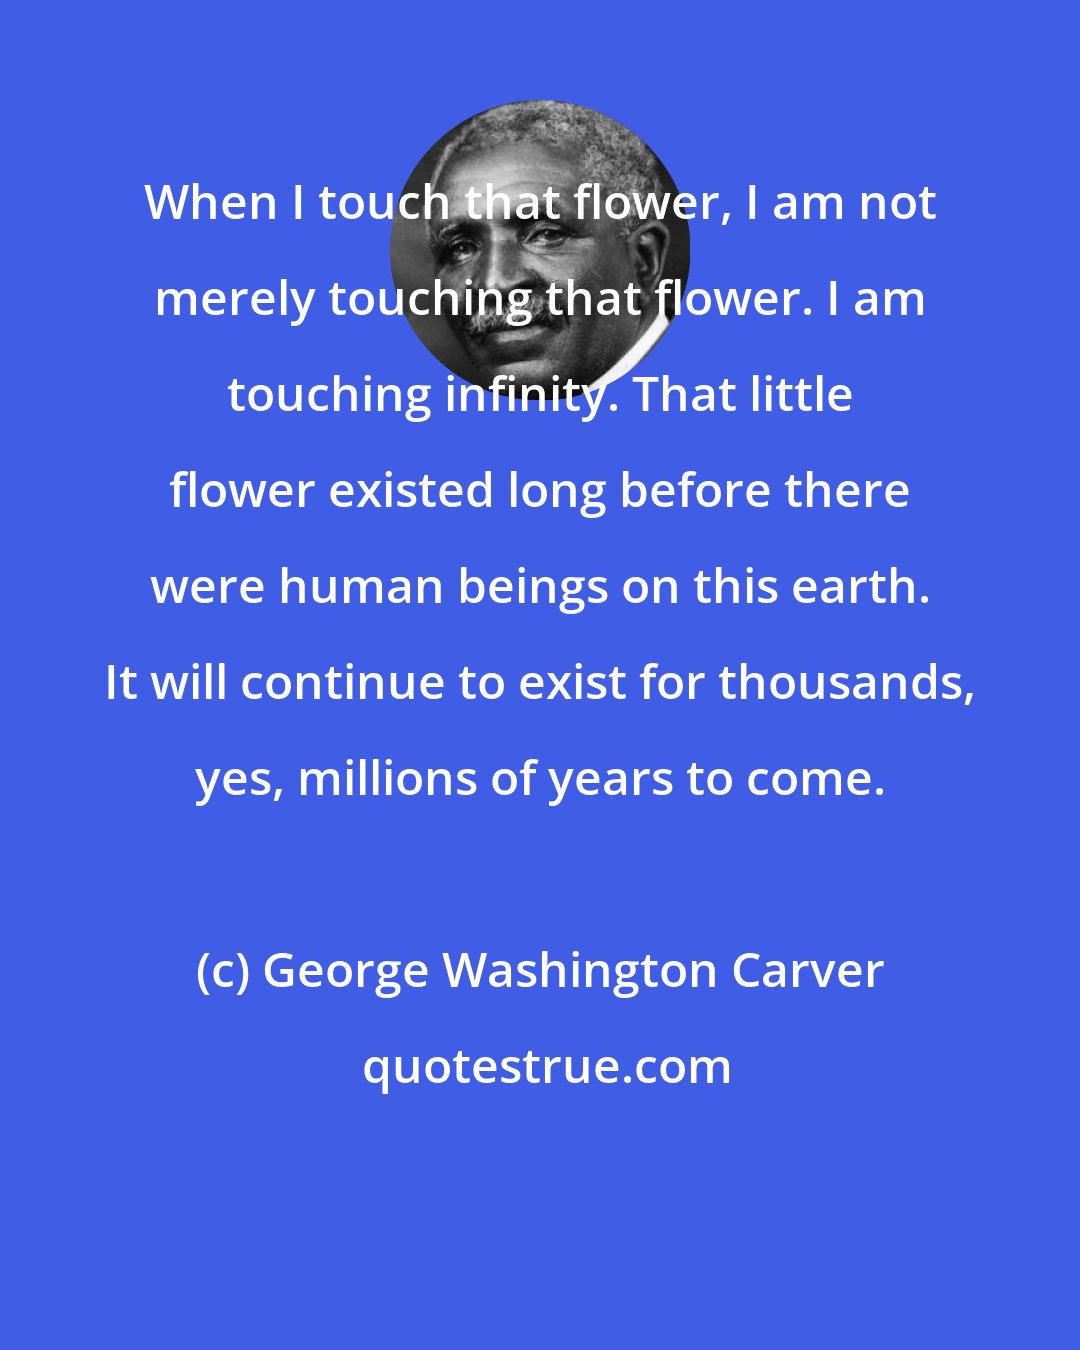 George Washington Carver: When I touch that flower, I am not merely touching that flower. I am touching infinity. That little flower existed long before there were human beings on this earth. It will continue to exist for thousands, yes, millions of years to come.